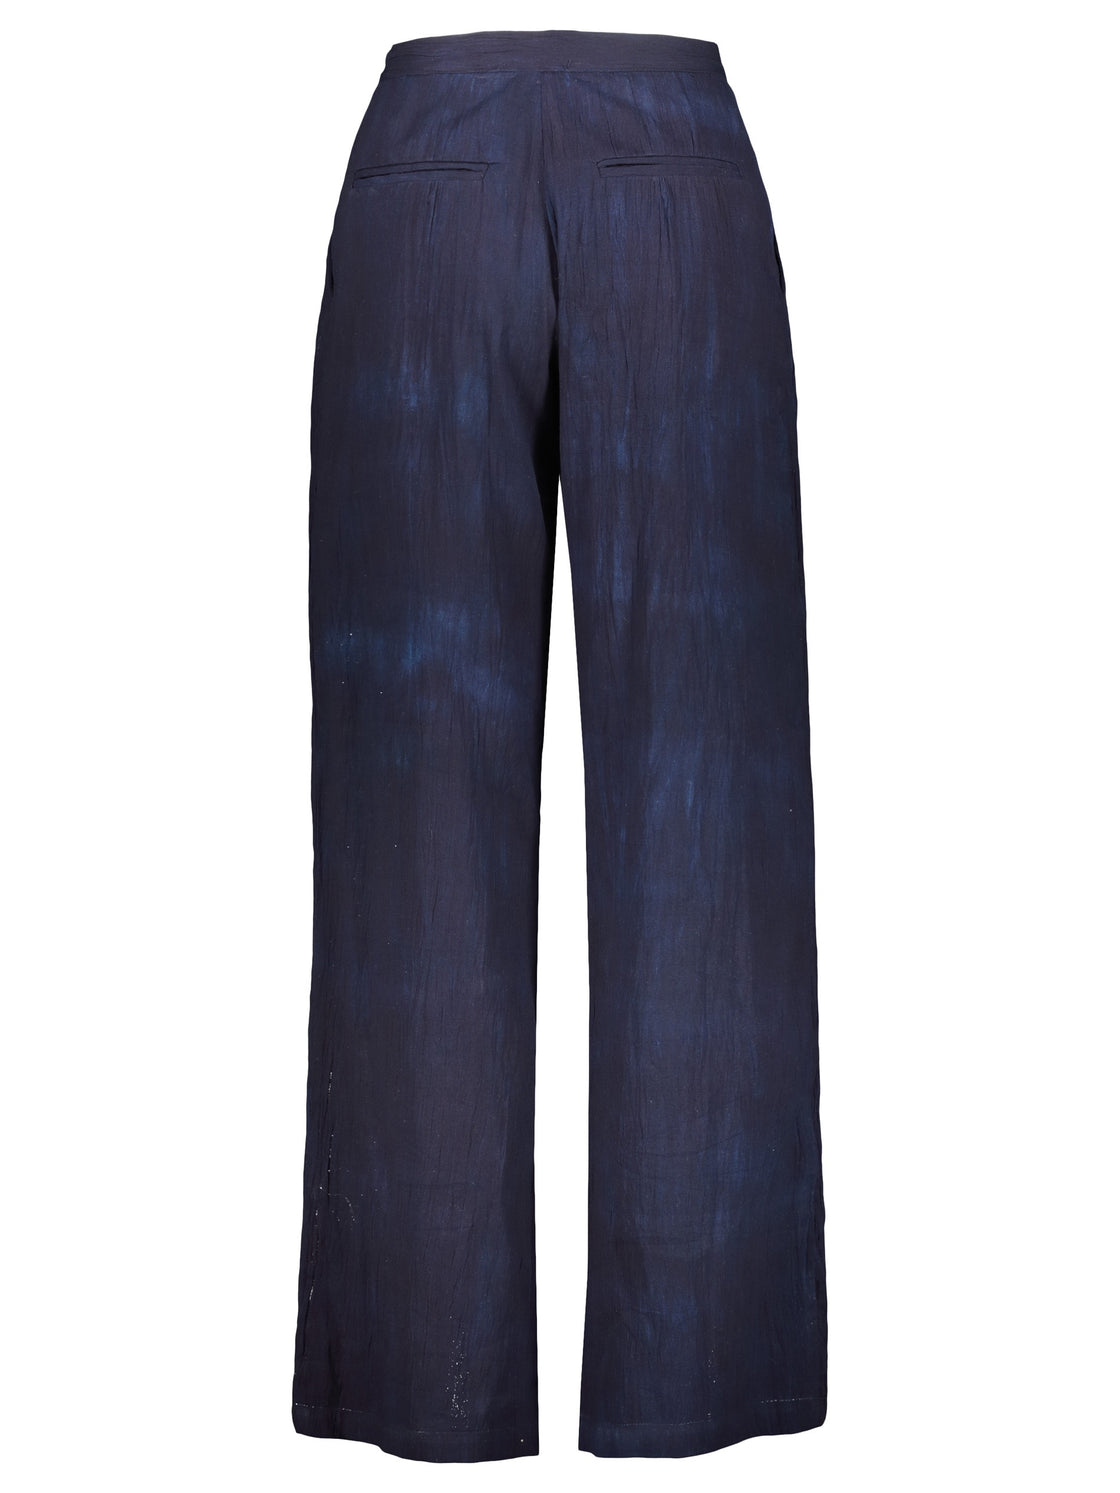 PATCHED INDIGO TONES TROUSERS